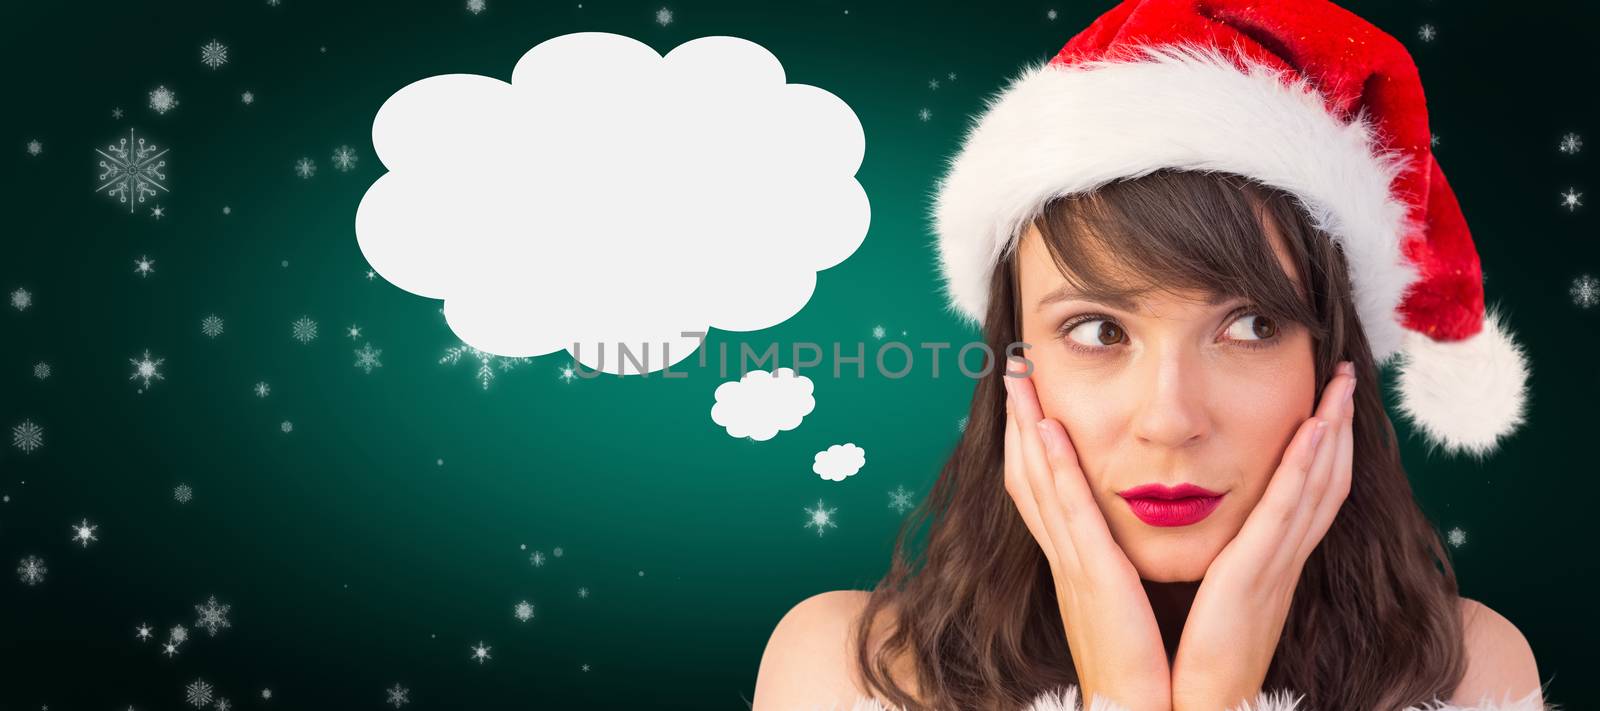 Pretty santa girl with hands on face against green background with vignette